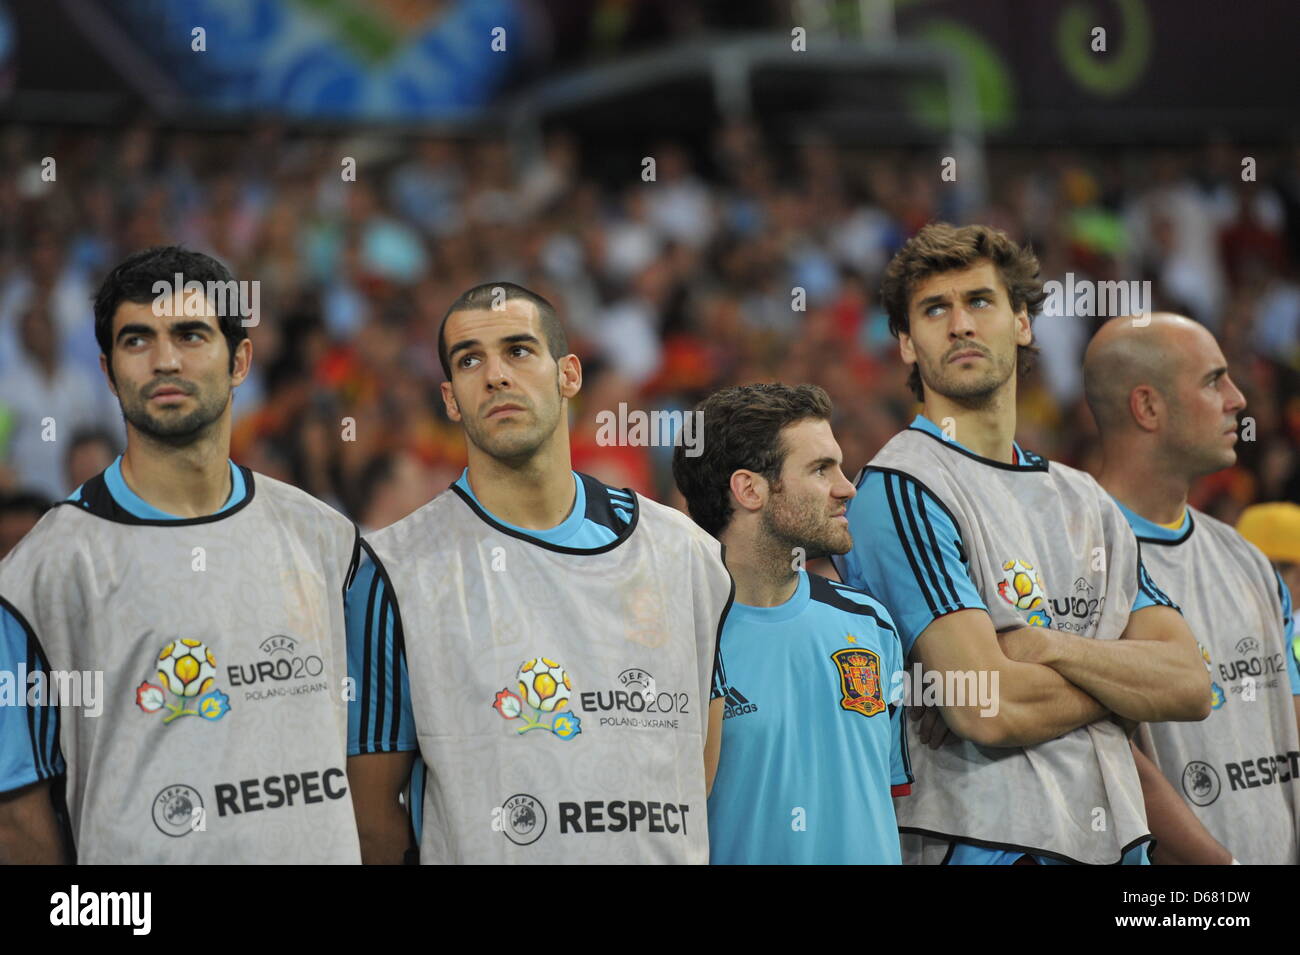 Spain's (L-R) Raul Albiol, Alvaro Negredo, Juan Mata, Fernando Llorente, Jose Manuel Reina during the UEFA EURO 2012 final soccer match Spain vs. Italy at the Olympic Stadium in Kiev, Ukraine, 01 July 2012. Photo: Andreas Gebert dpa (Please refer to chapters 7 and 8 of http://dpaq.de/Ziovh for UEFA Euro 2012 Terms & Conditions) Stock Photo